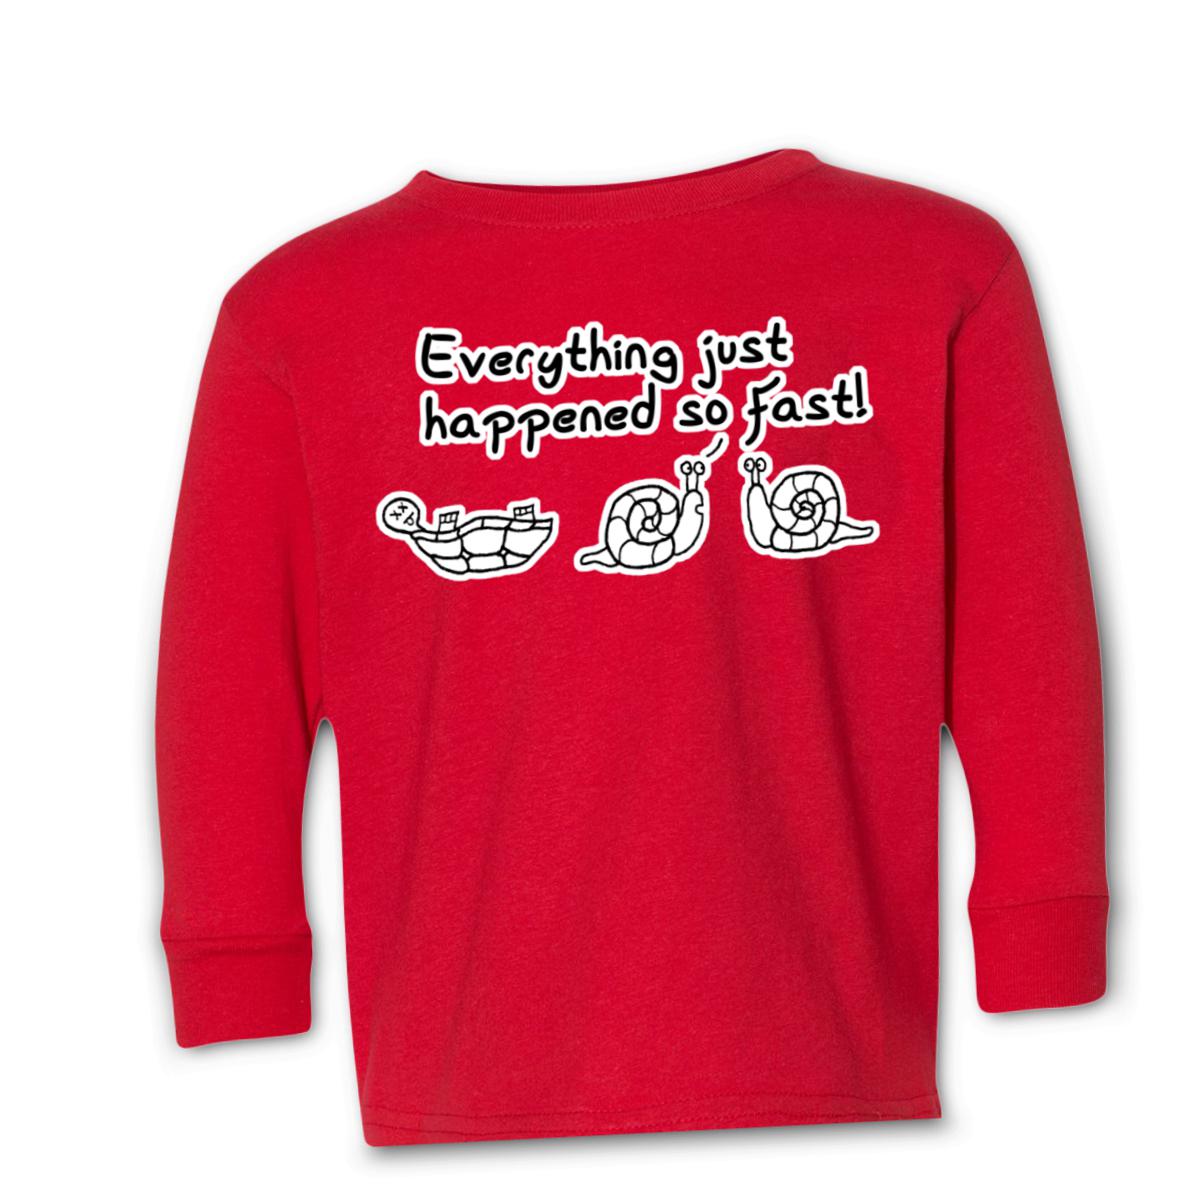 Happened So Fast Kid's Long Sleeve Tee Small red